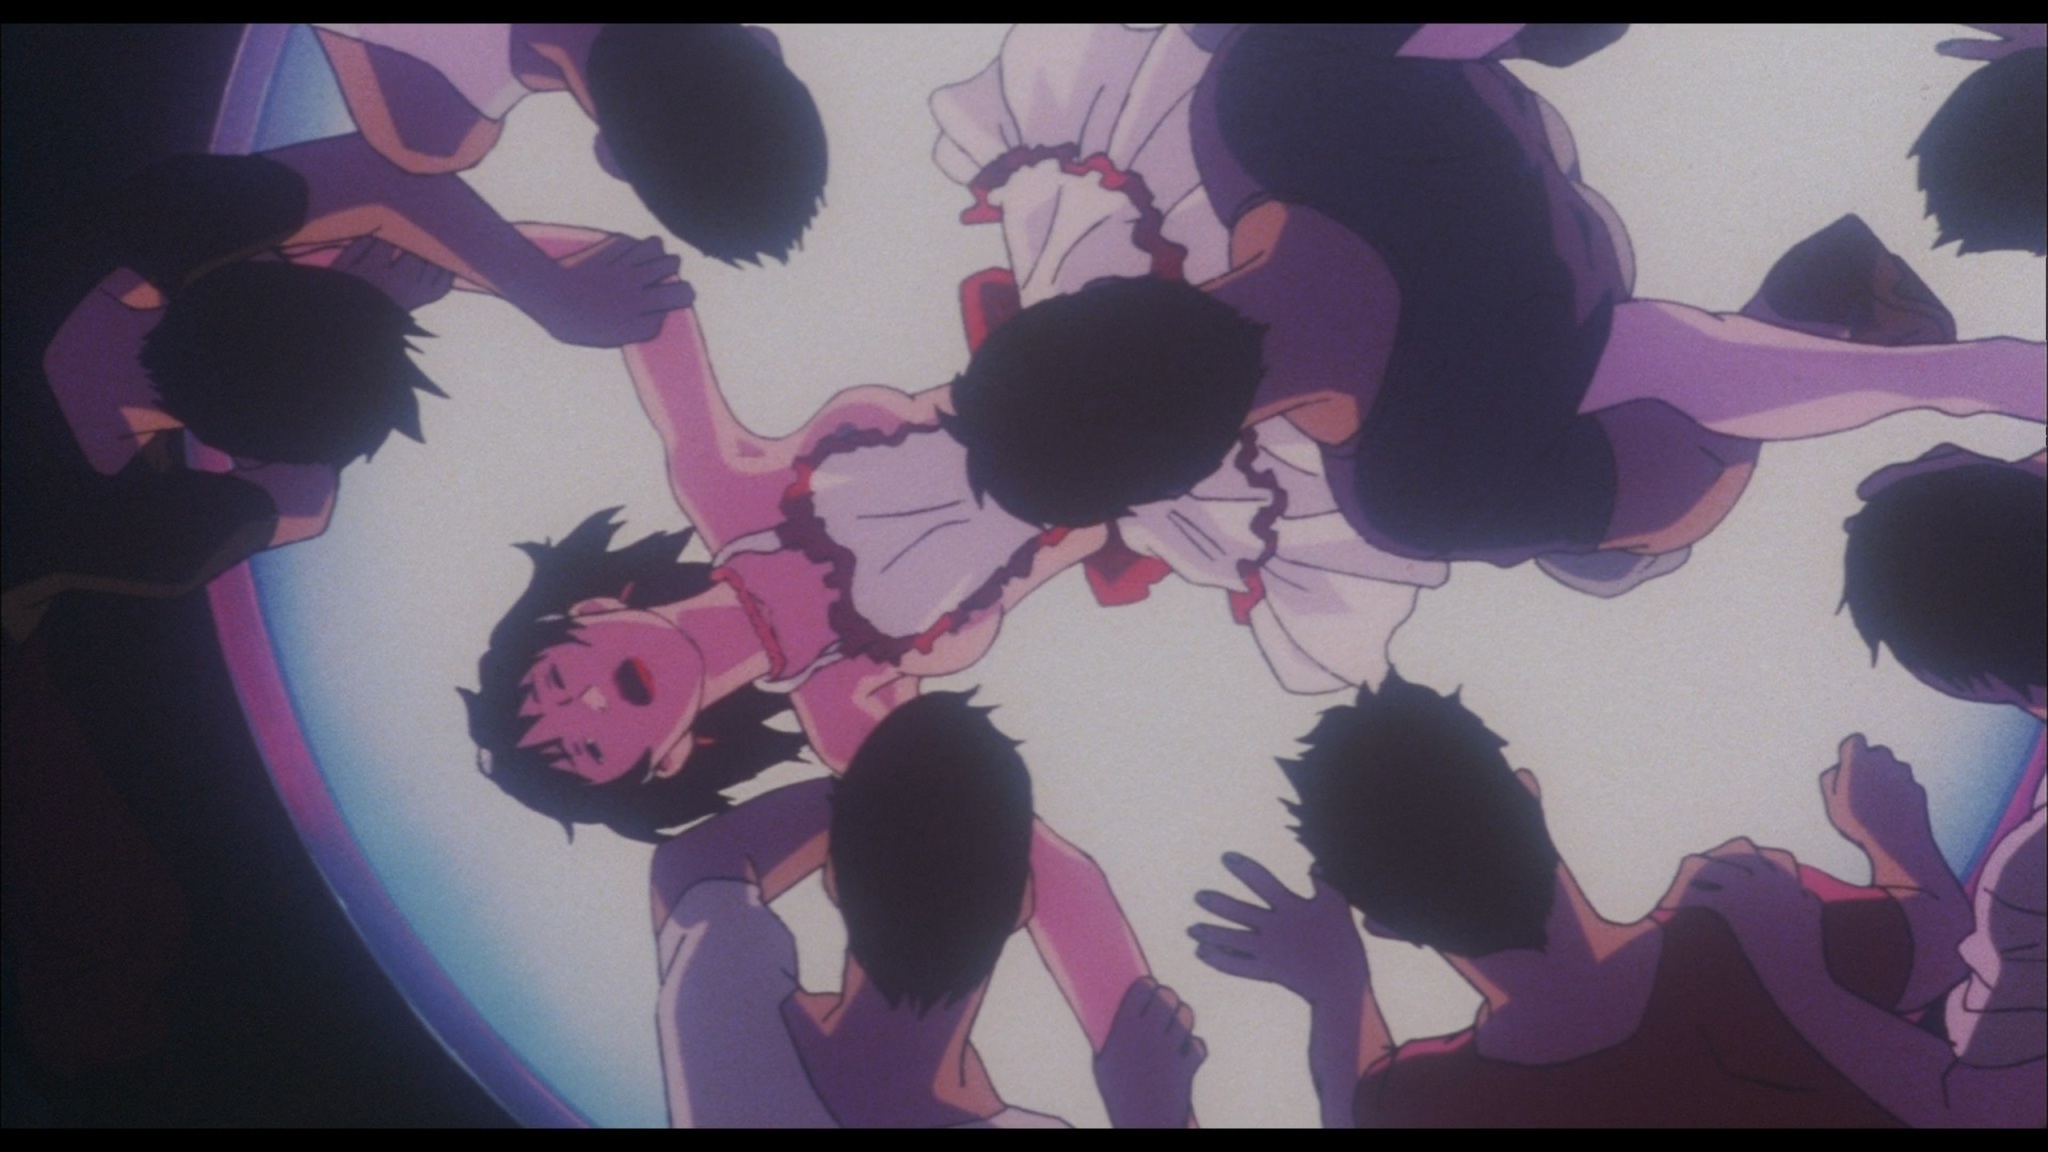 In Perfect Blue, Kon does not just describe the deviant aspect of the idol ...